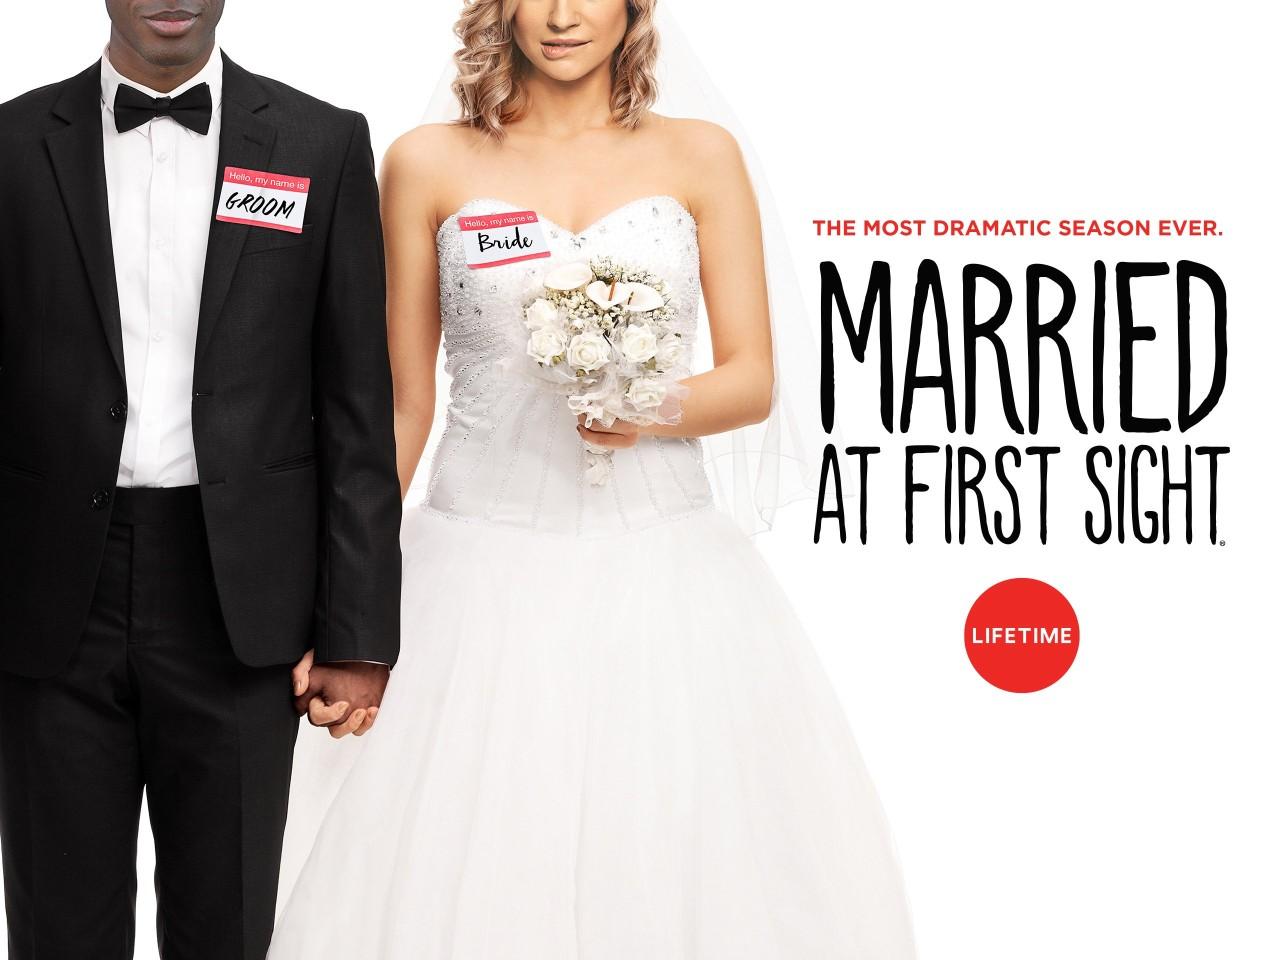 'Married At First Sight: Australia' Season 8 on Lifetime; Release Date - New Series Of Married At First Sight Australia